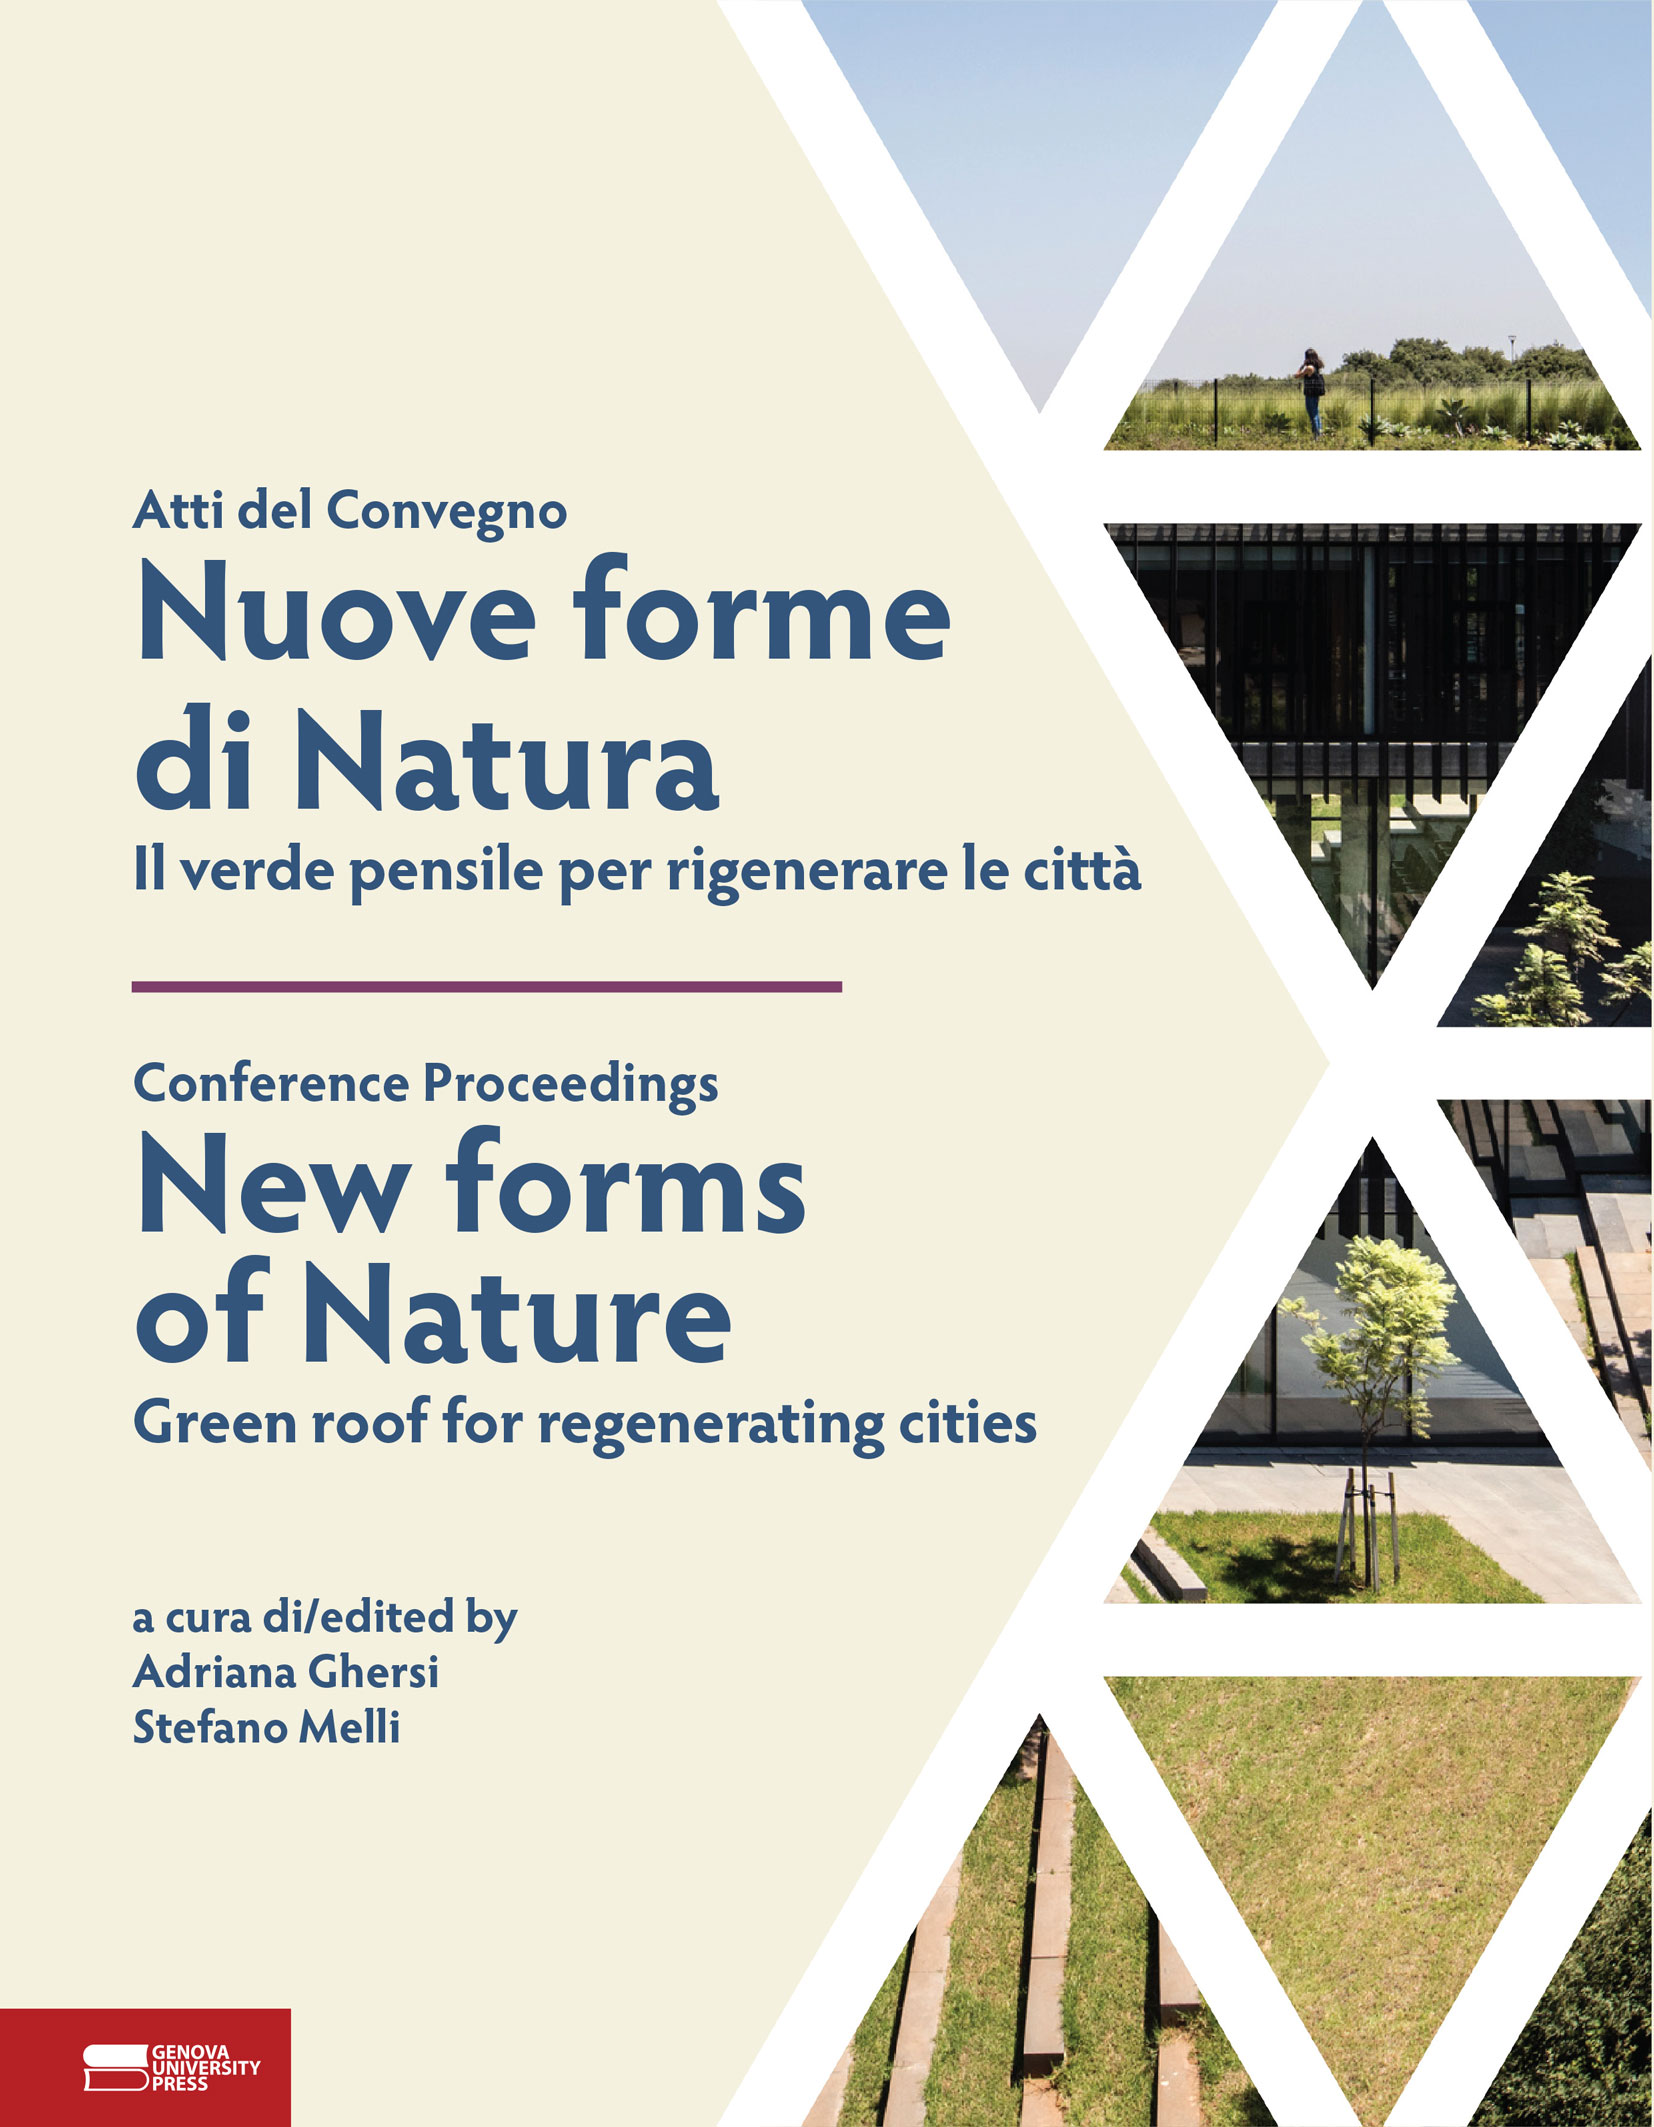 Nuove forme di Natura/New forms of Nature